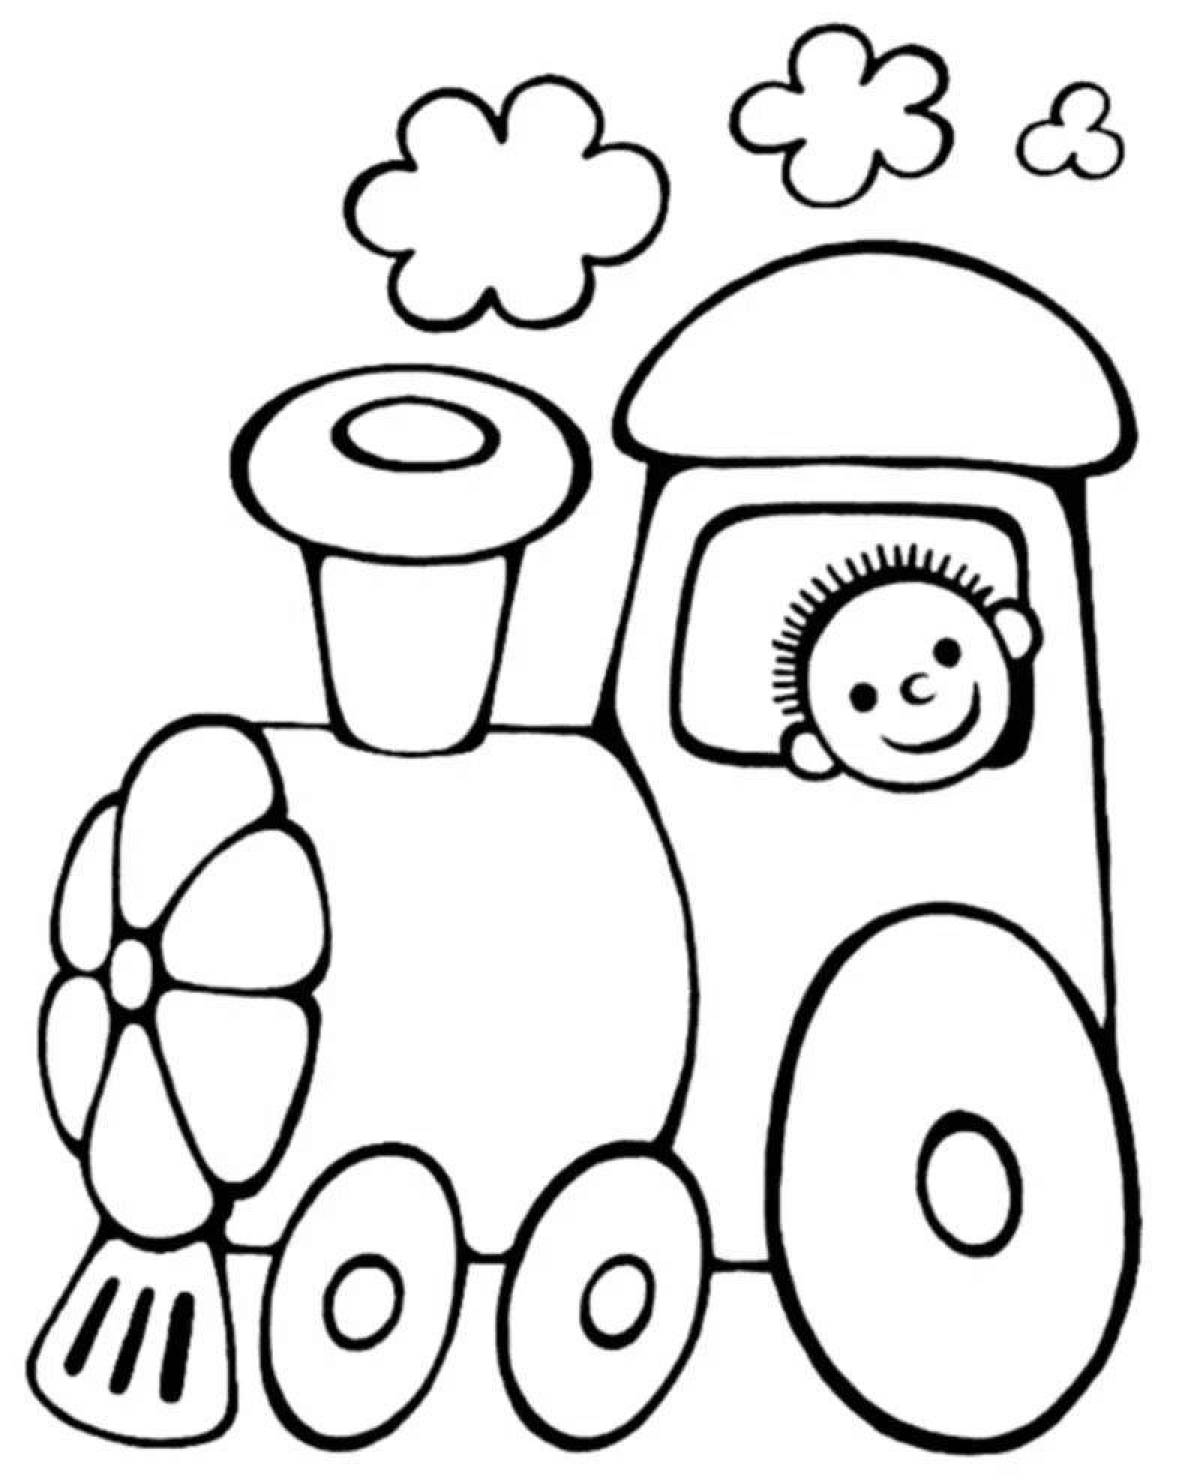 Intriguing coloring page 2 3